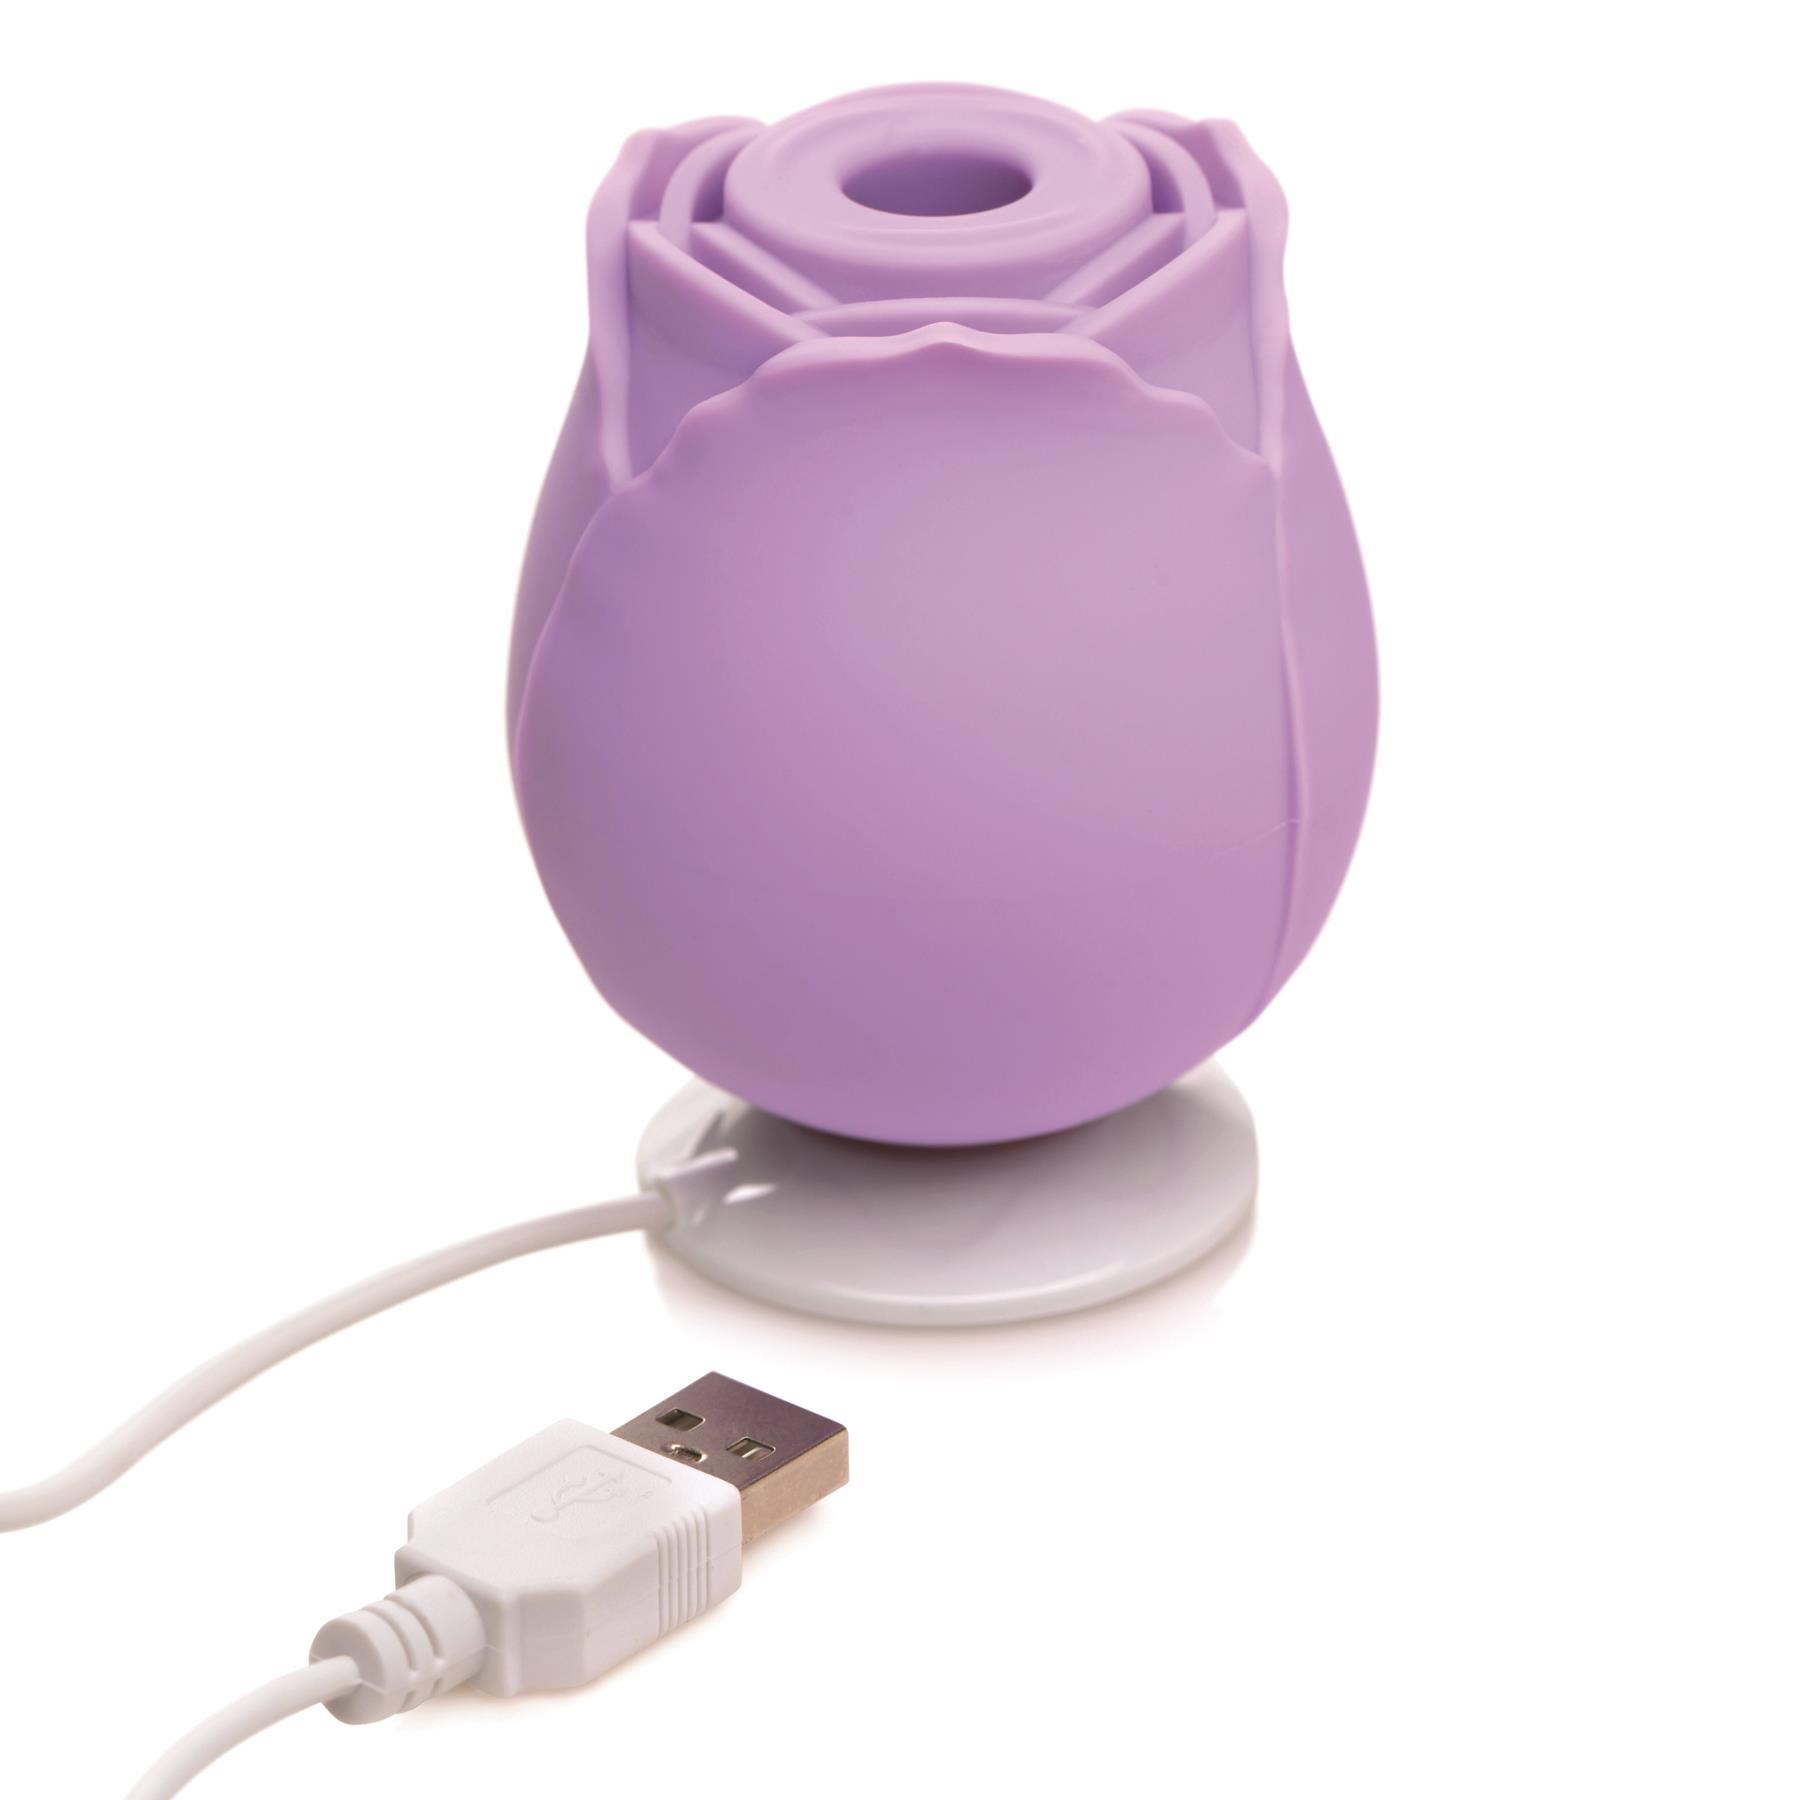 Bloomgasm Suction Rose Clitoral Stimulator Showing How to Charge - Purple